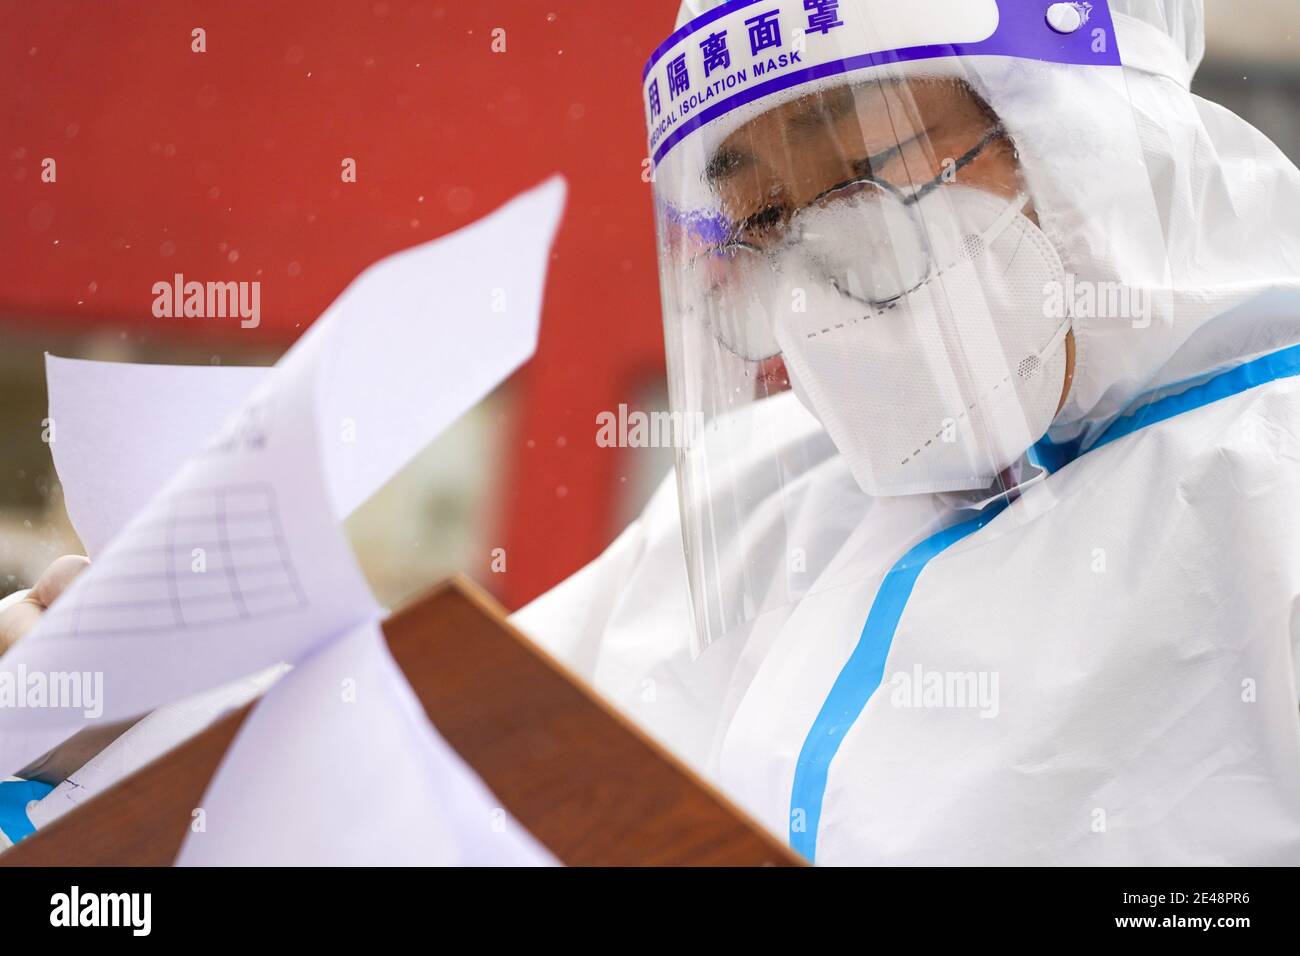 (210122) -- CHANGCHUN, Jan. 22, 2021 (Xinhua) -- A staff member checks identificition information at a nucleic acid testing site in Dongchang District of Tonghua, northeast China's Jilin Province, Jan. 20, 2021. Northeast China's Jilin Province on Thursday reported 19 new confirmed COVID-19 cases and seven new asymptomatic infections, the provincial health commission said Friday. Of the new confirmed cases, 10 were reported in the provincial capital Changchun and nine in the city of Tonghua. The new confirmed cases include one that was previously reported as an asymptomatic case. Of the n Stock Photo